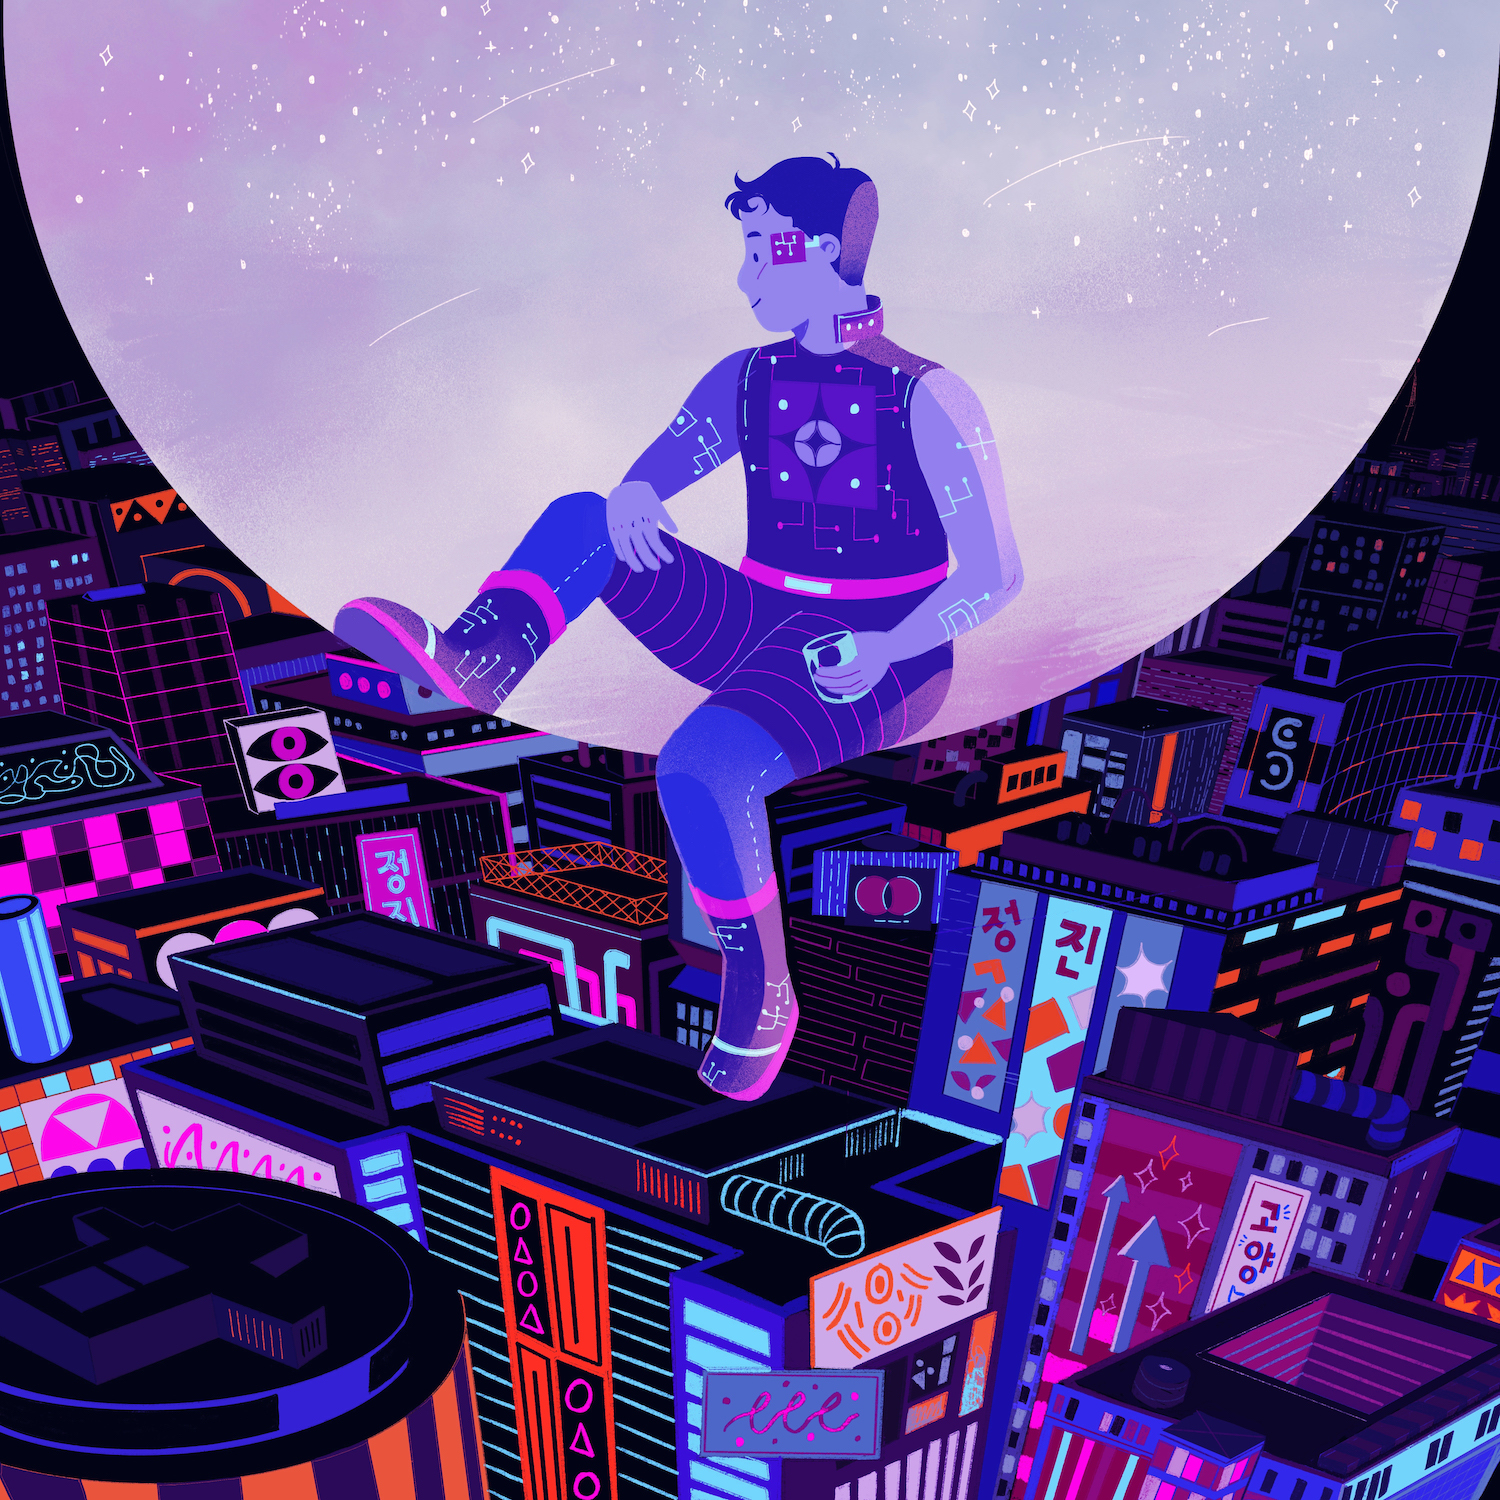 A cyborg with various embedded circuitry sits upon an abstract cradle with an old fashioned glass in hand. Below him, a neon city with Korean signage illuminates the night.